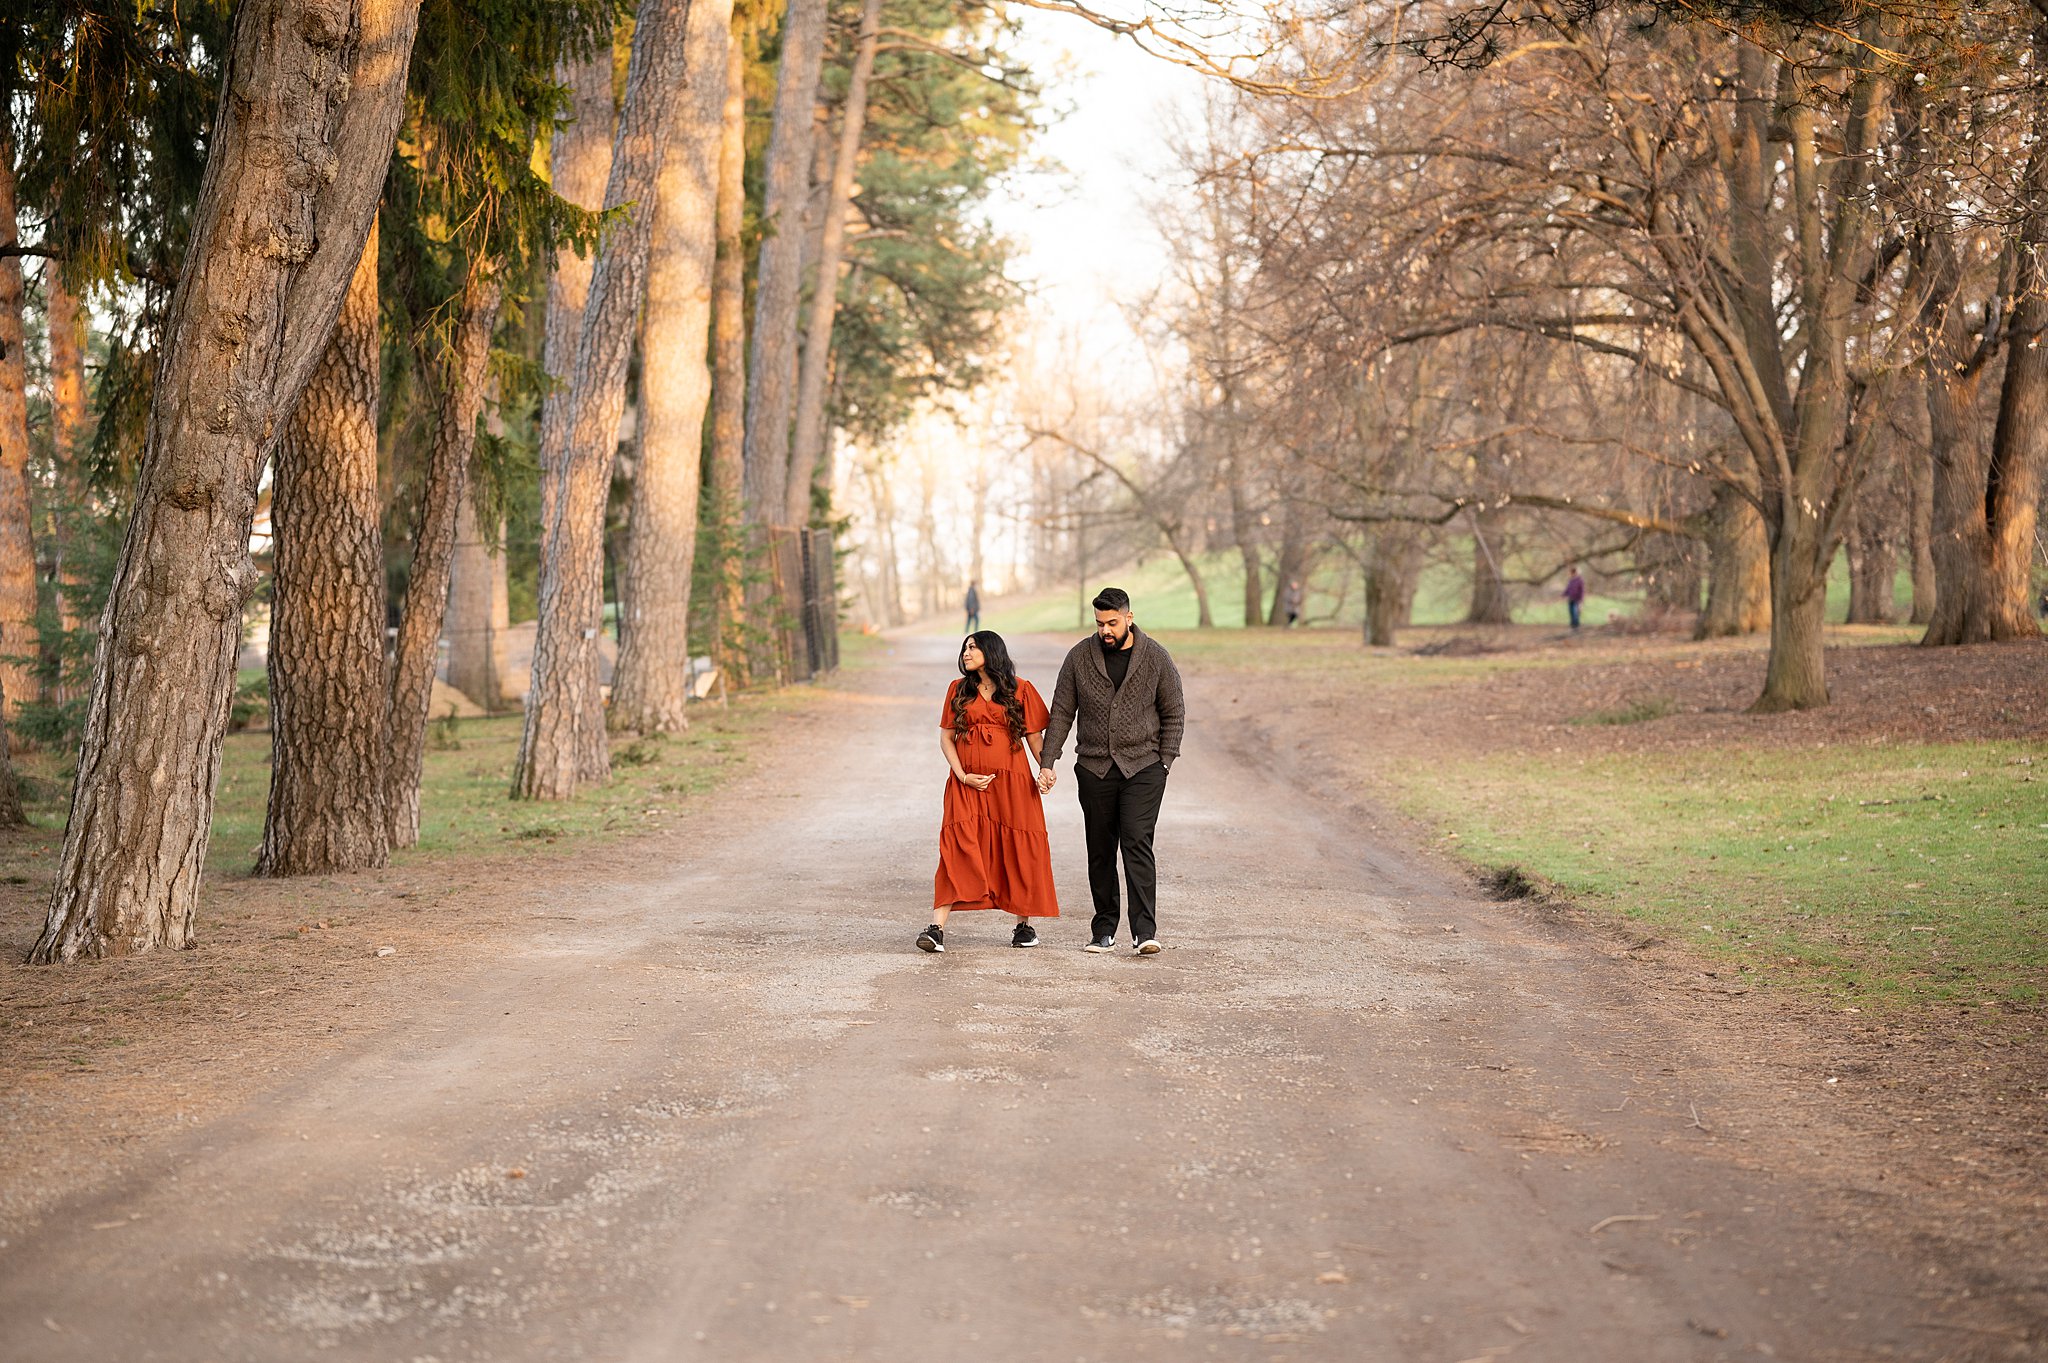 A mother-to-be in a red maternity dress walks down a park path lined with tall trees while holding hands with her husband ottawa 3d ultrasound clinics